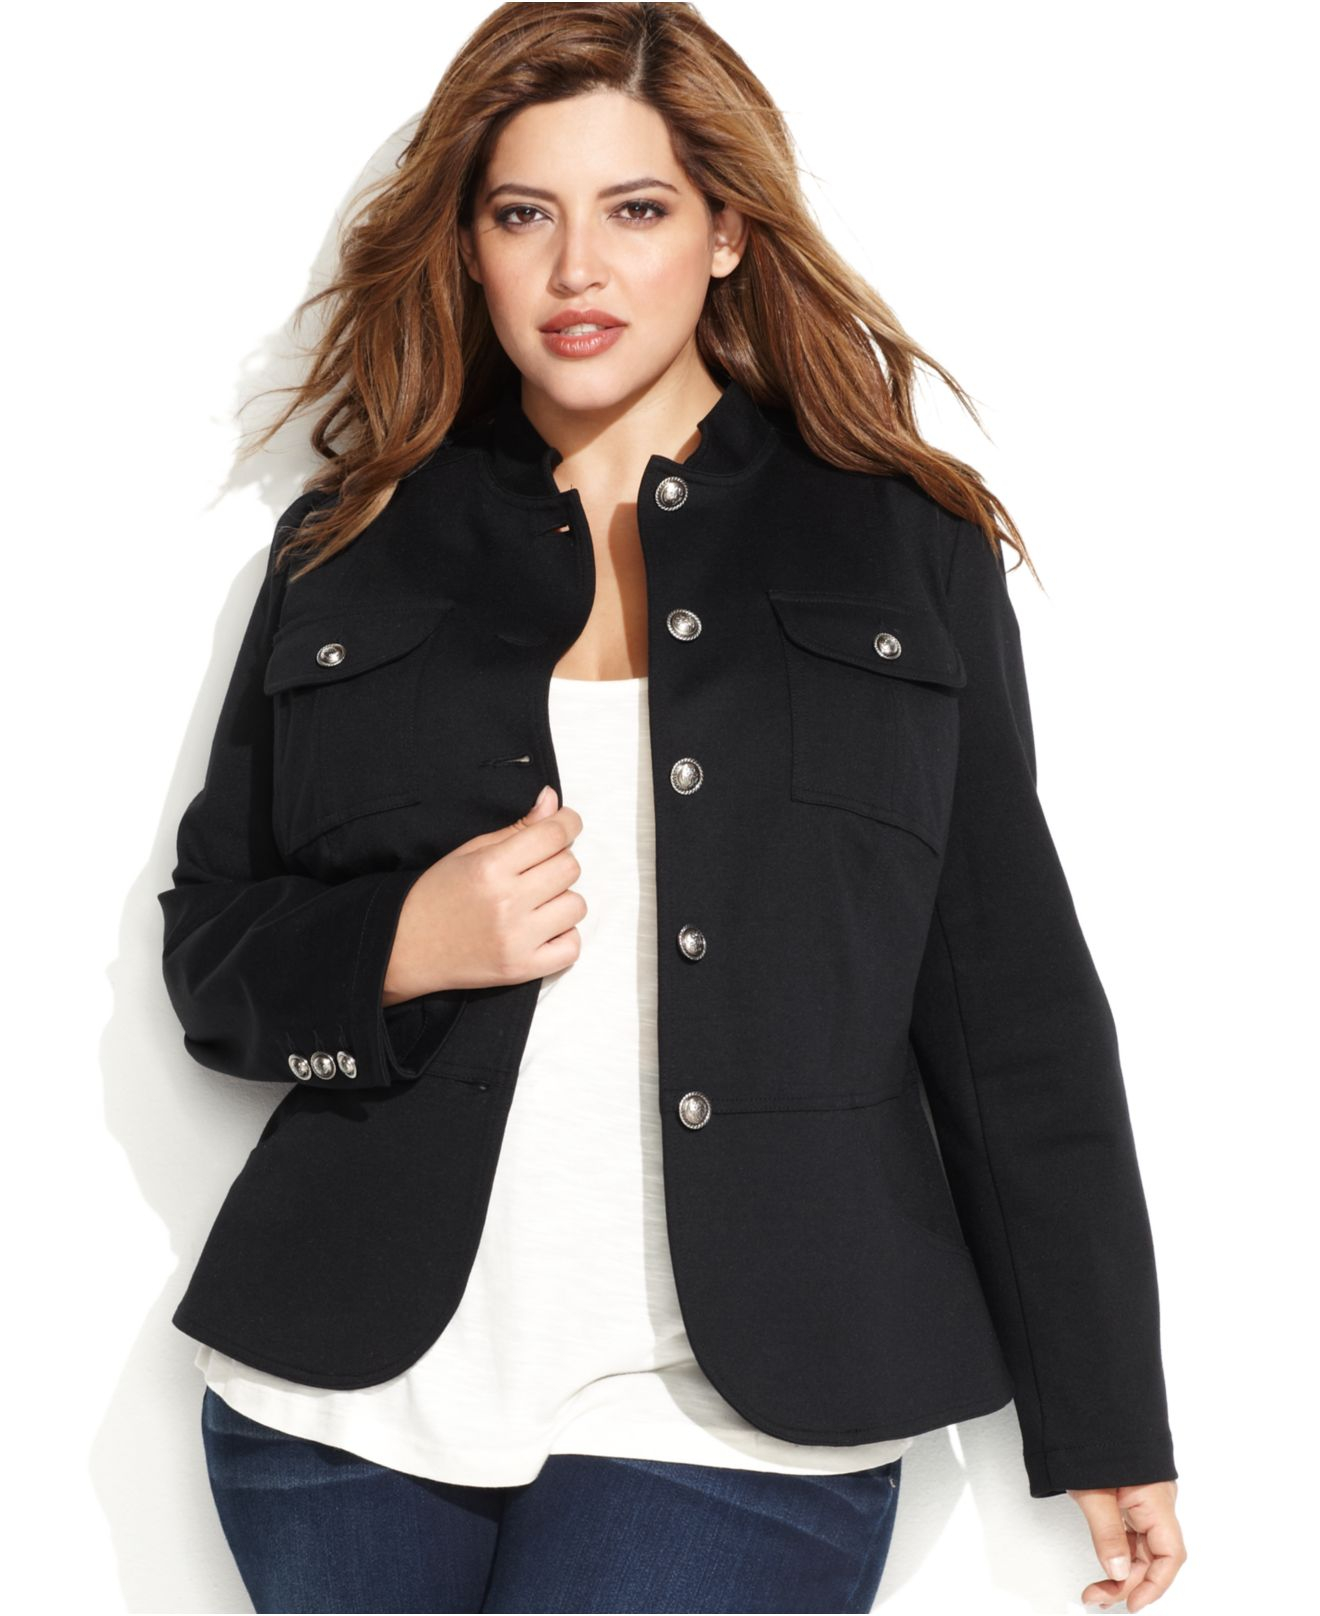 Hurtig snack Pinpoint INC International Concepts Plus Size Military-Inspired Jacket in Deep Black  (Black) - Lyst